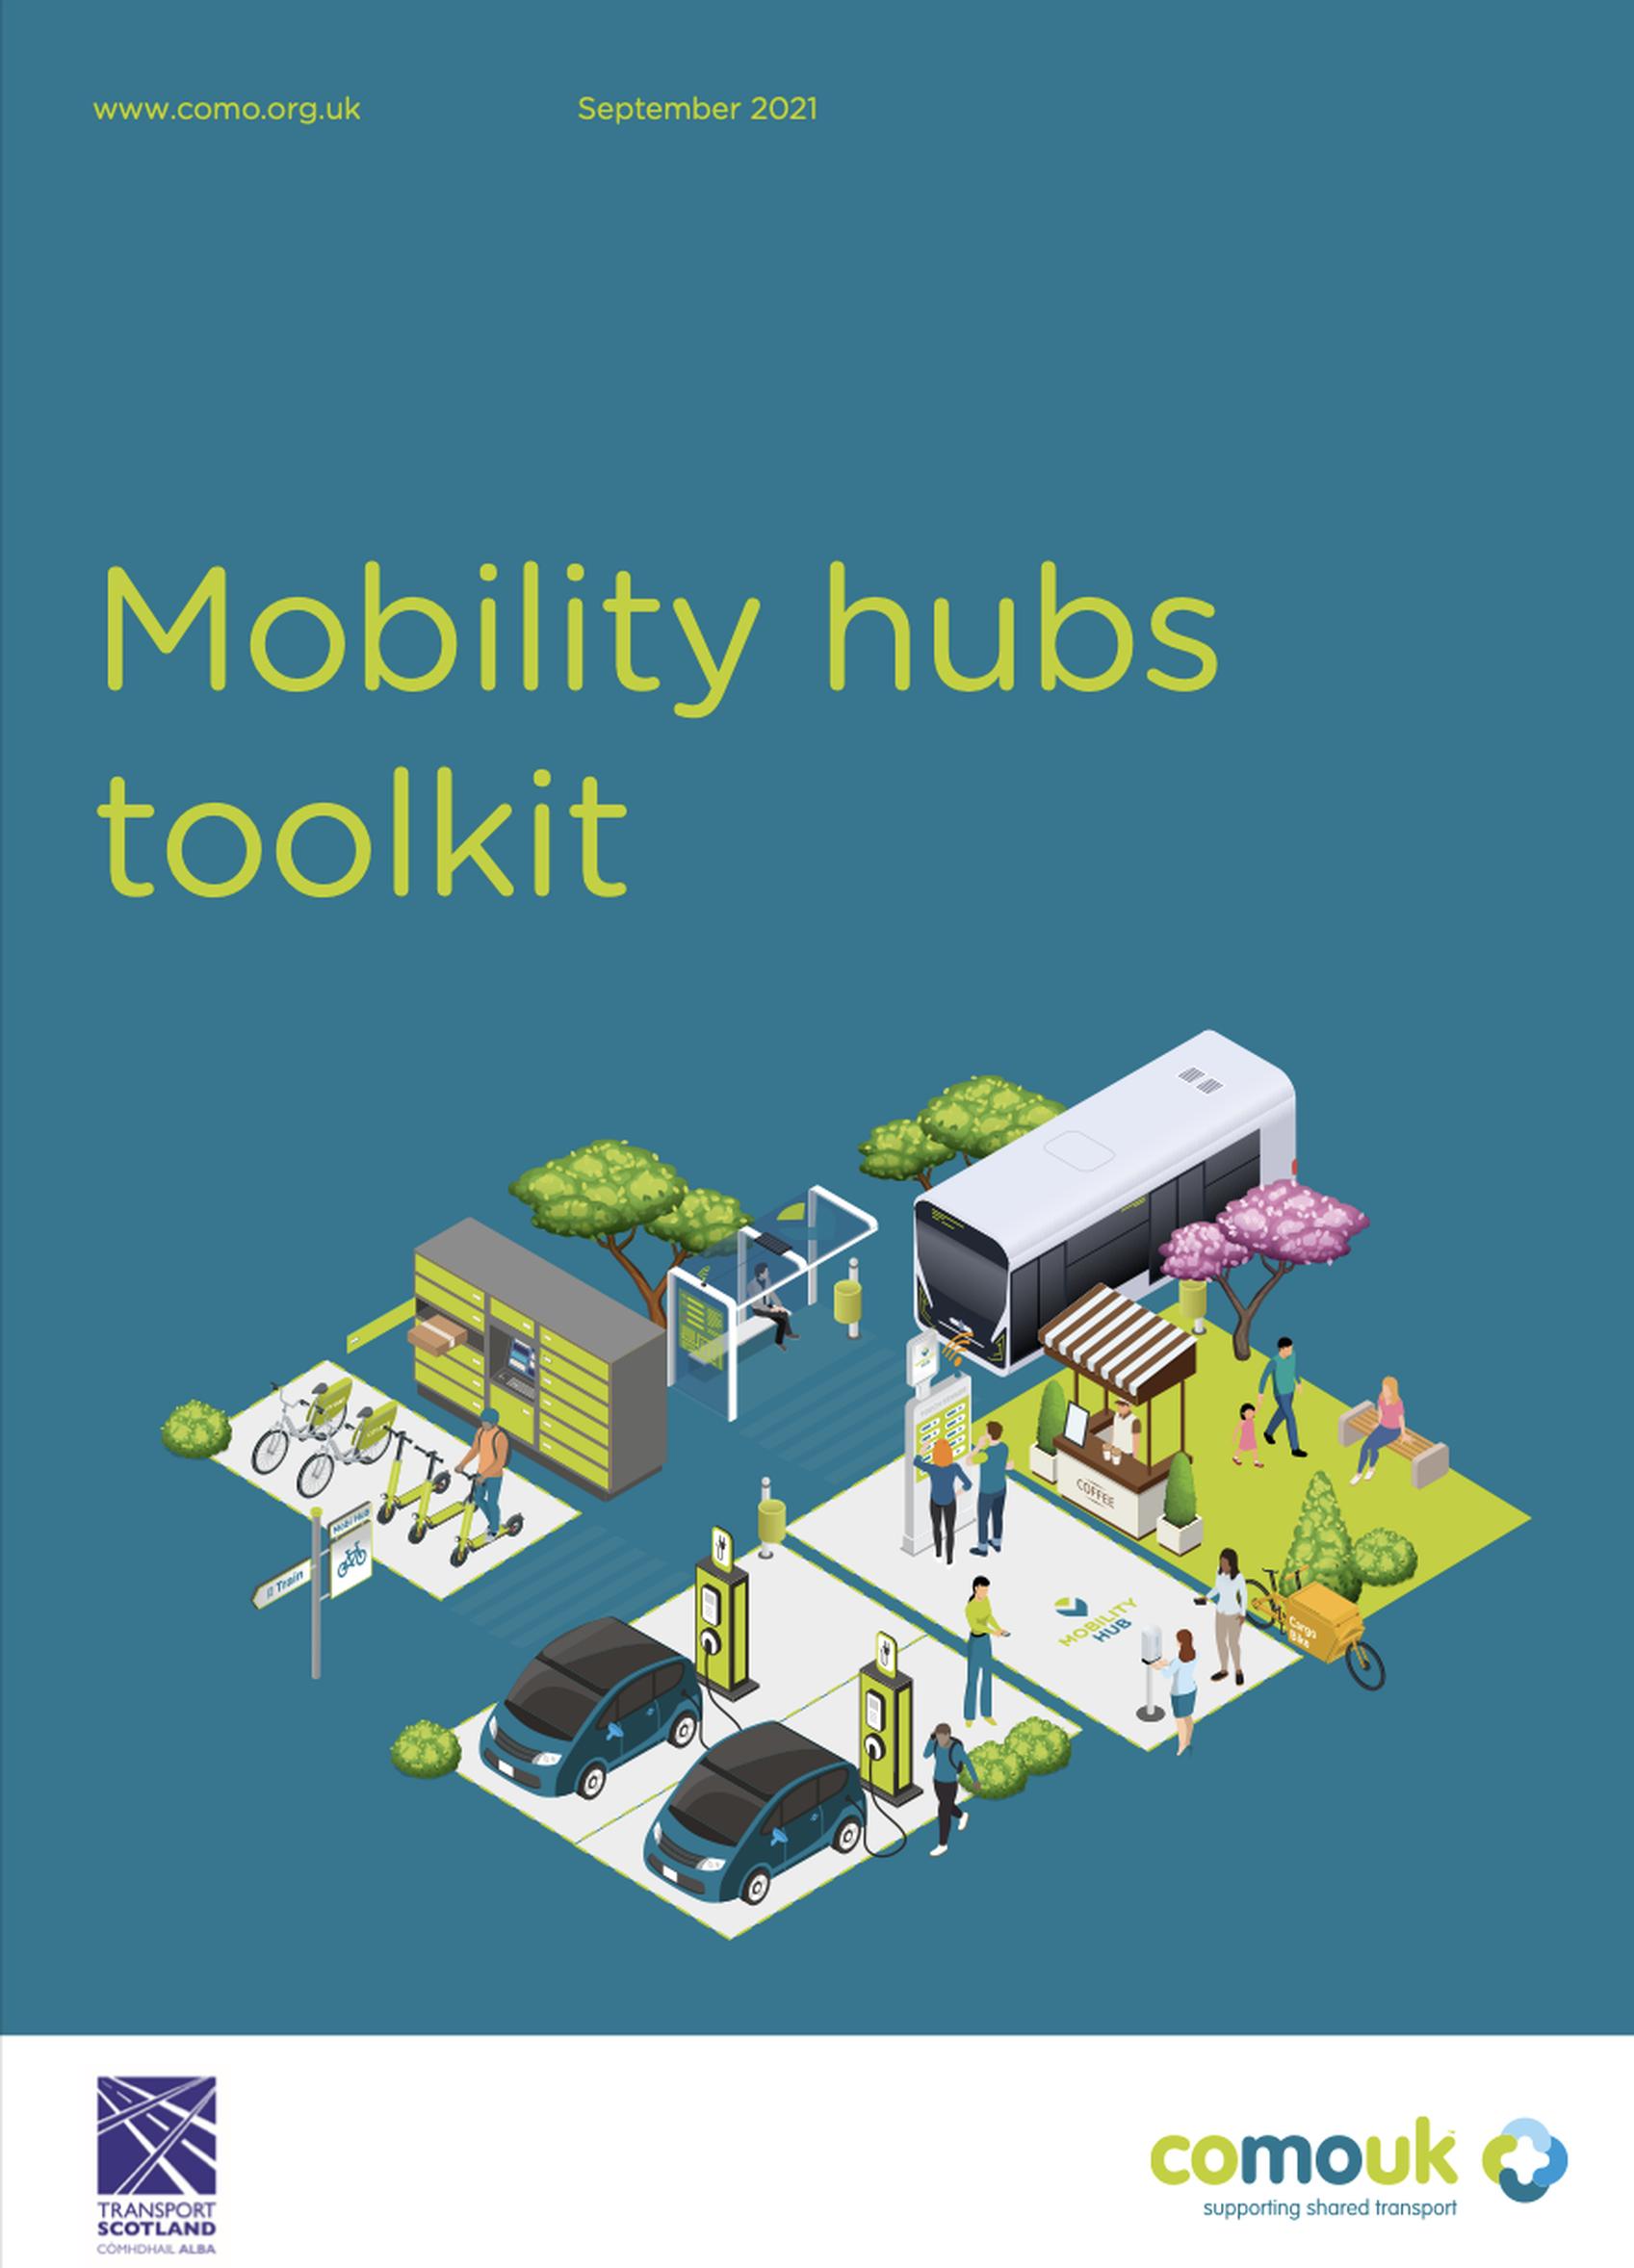 CoMoUK launches mobility hub toolkit developed for Scotland